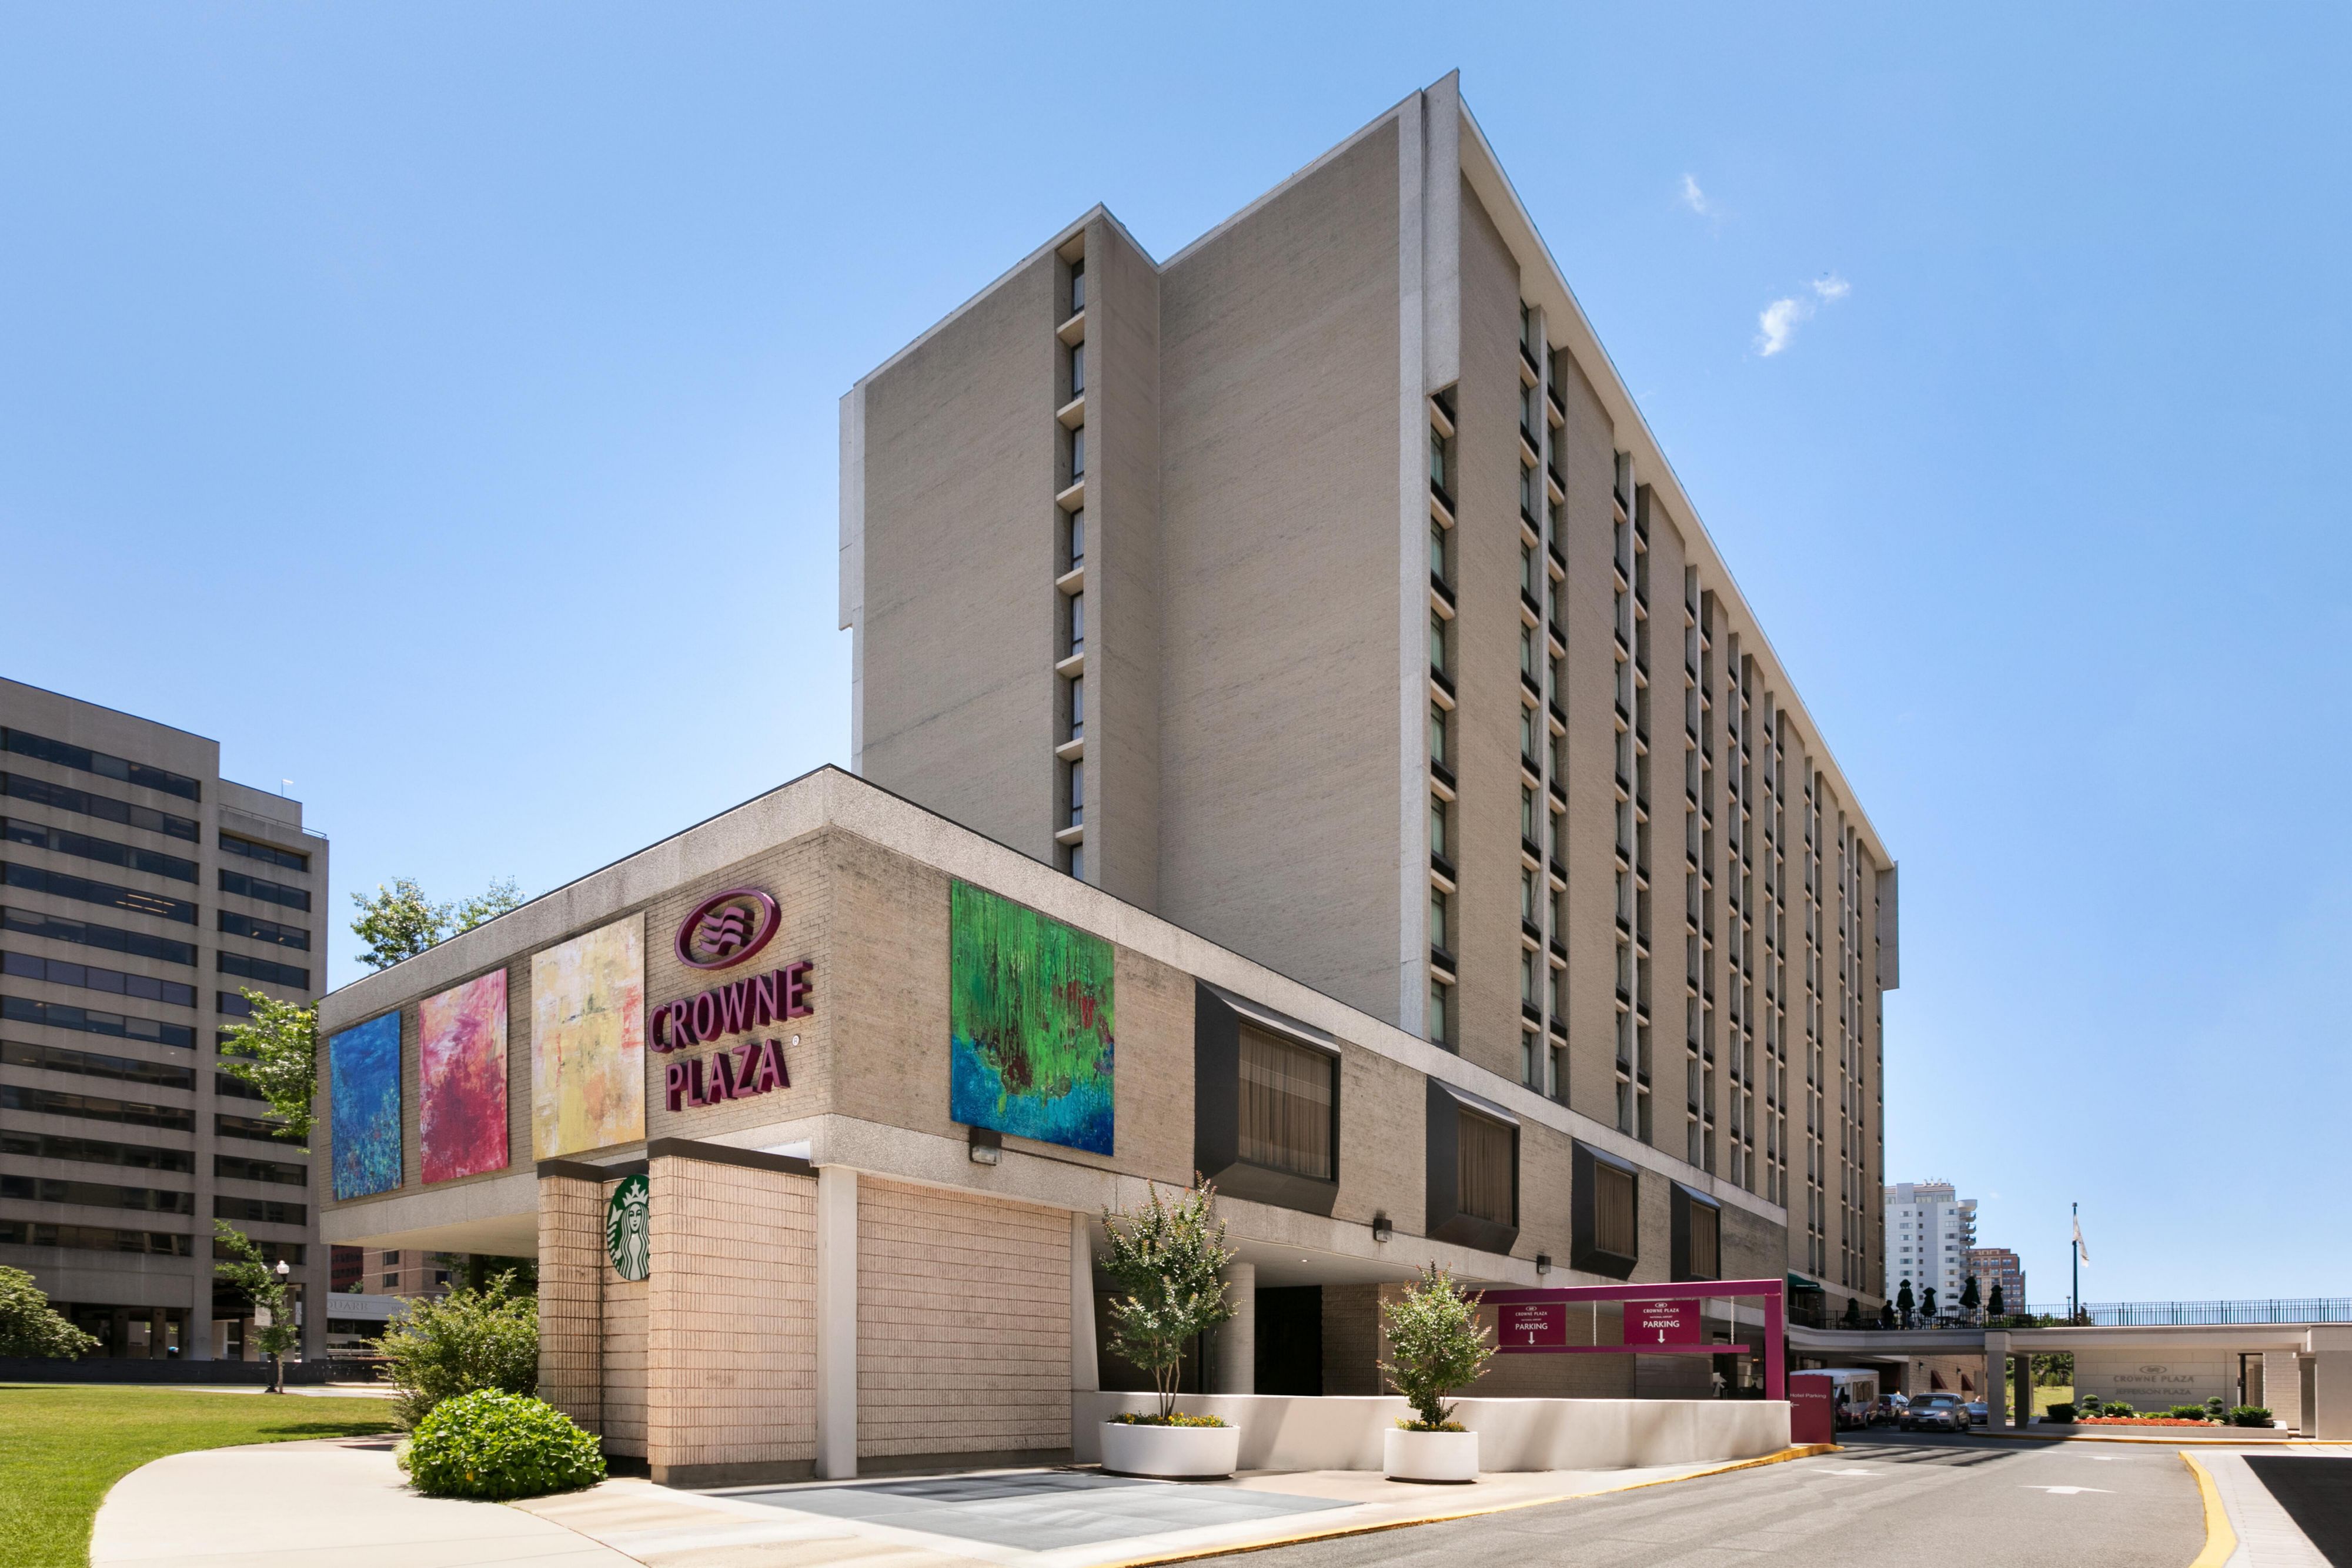 We are within walking distance of the Crystal City Metro Station.